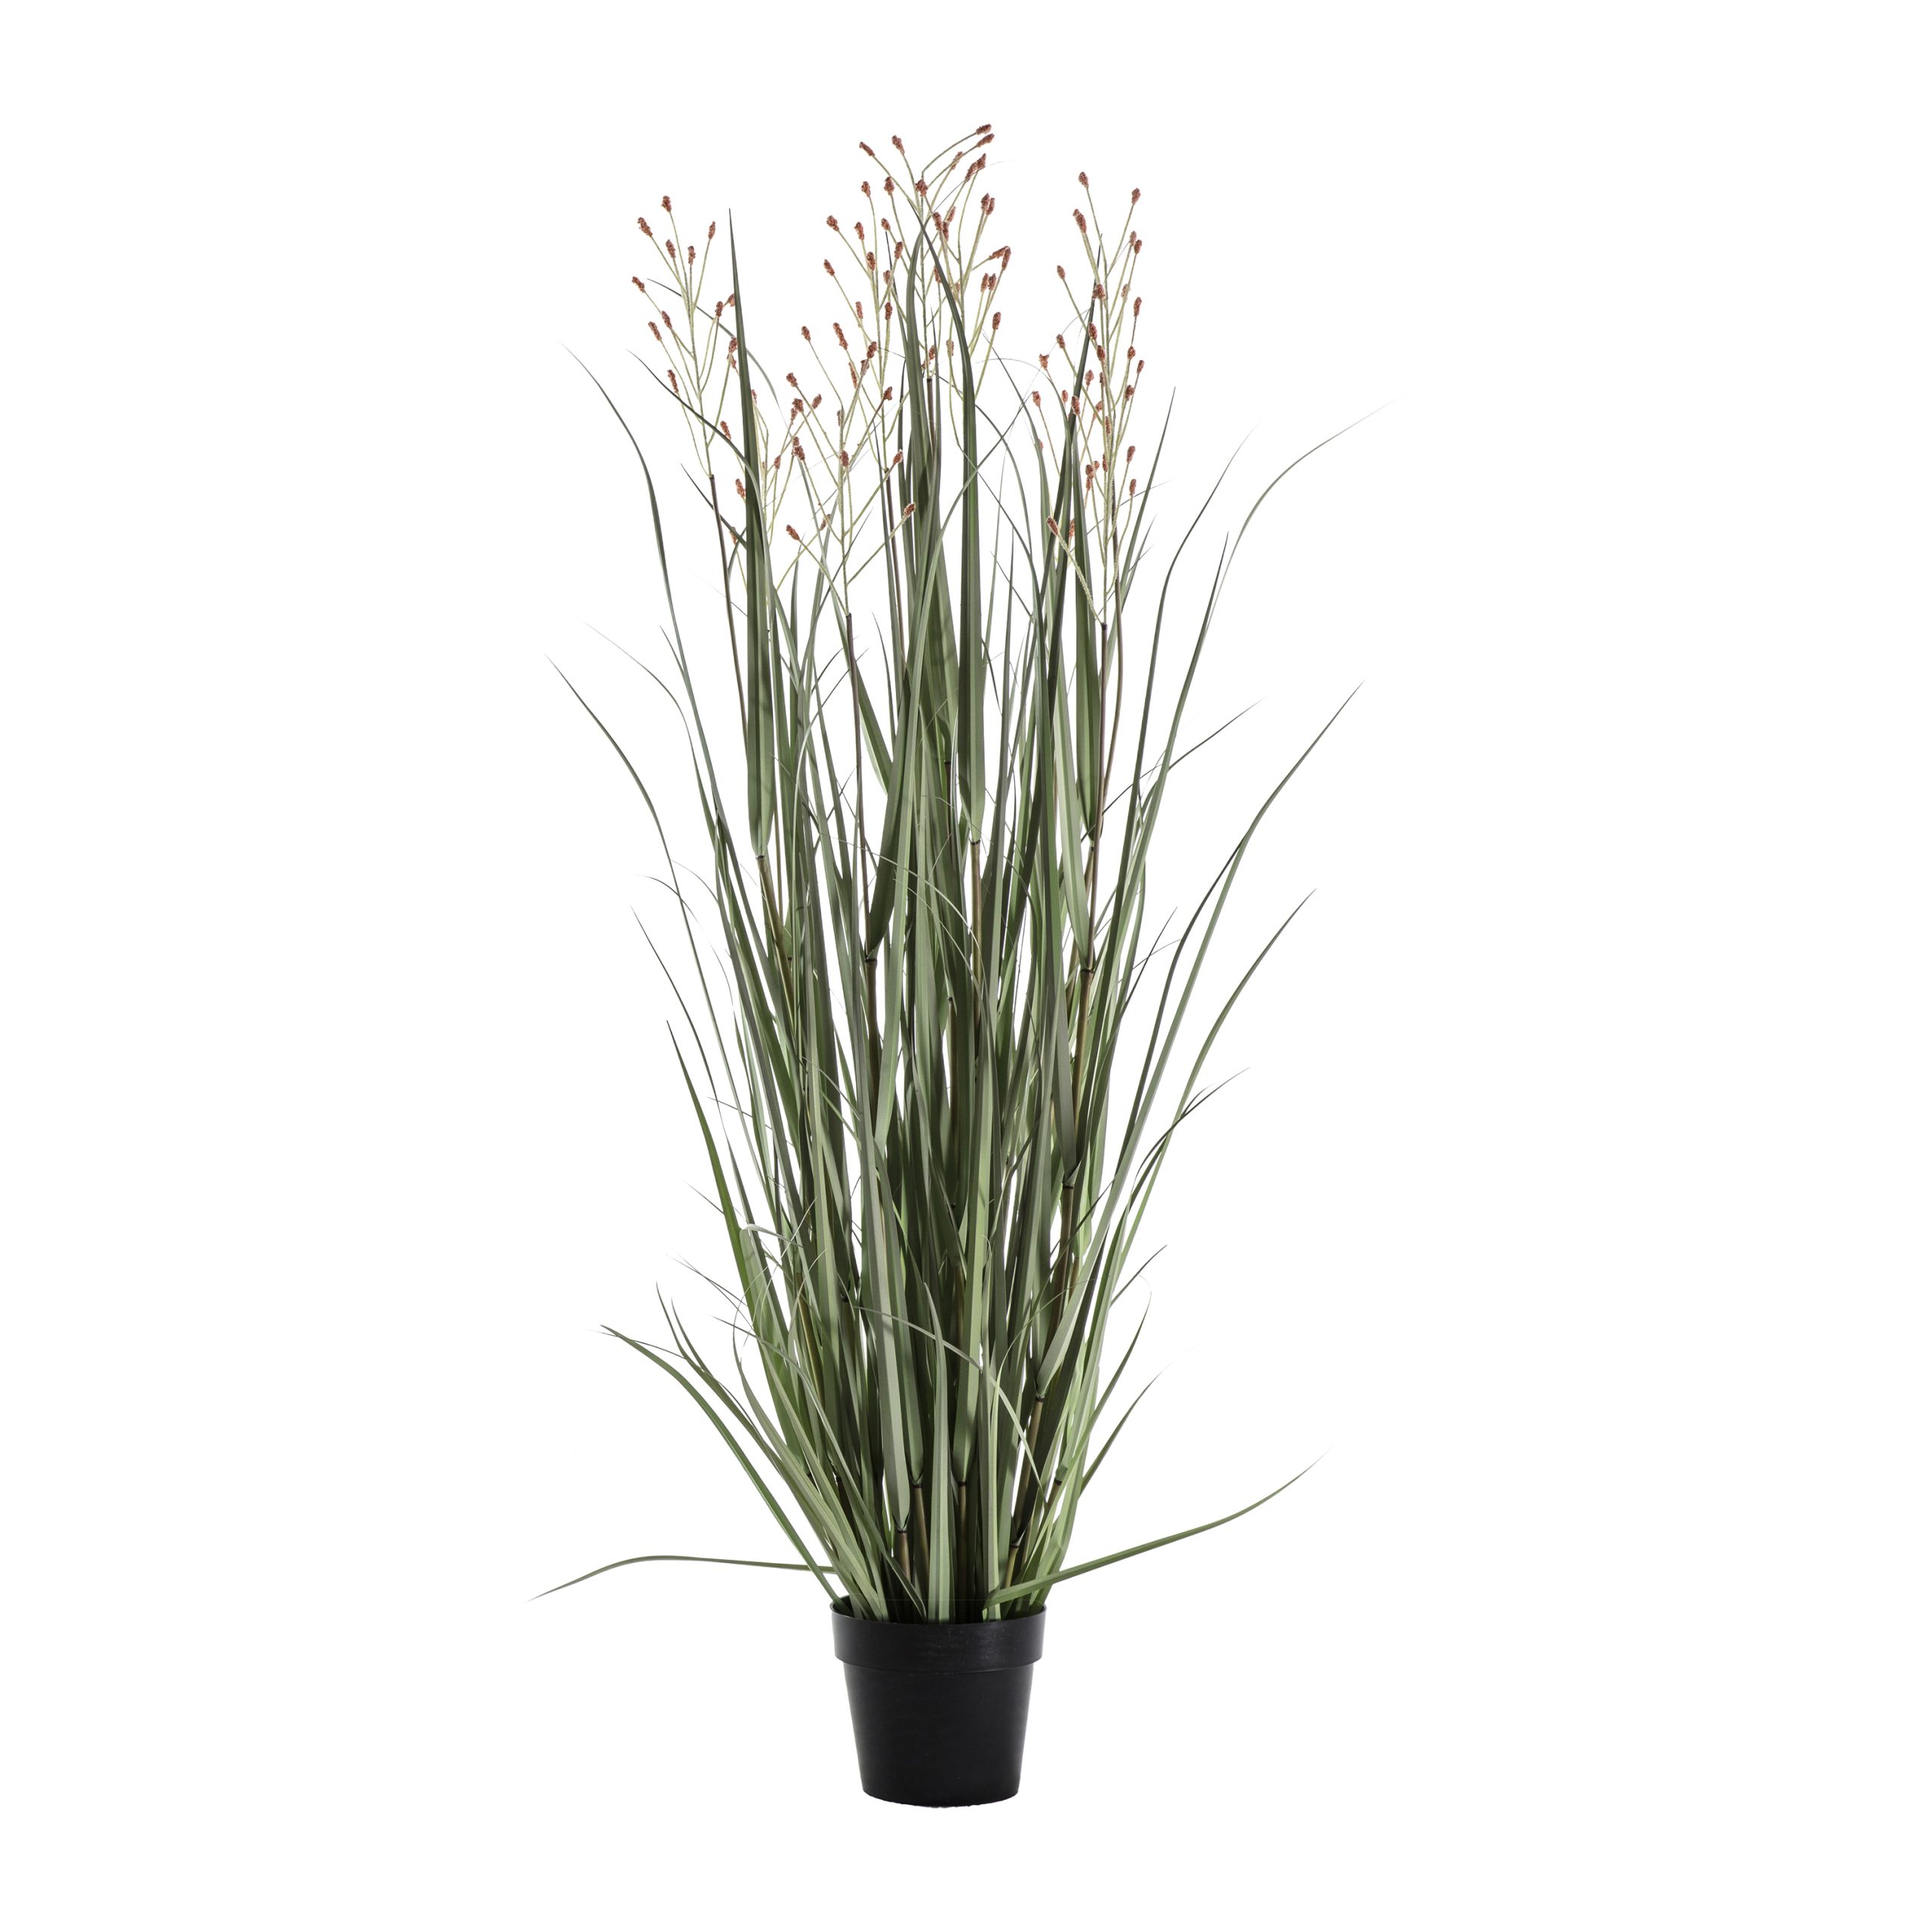 Gallery Direct Potted Grass w/9 Heads Green/Russet